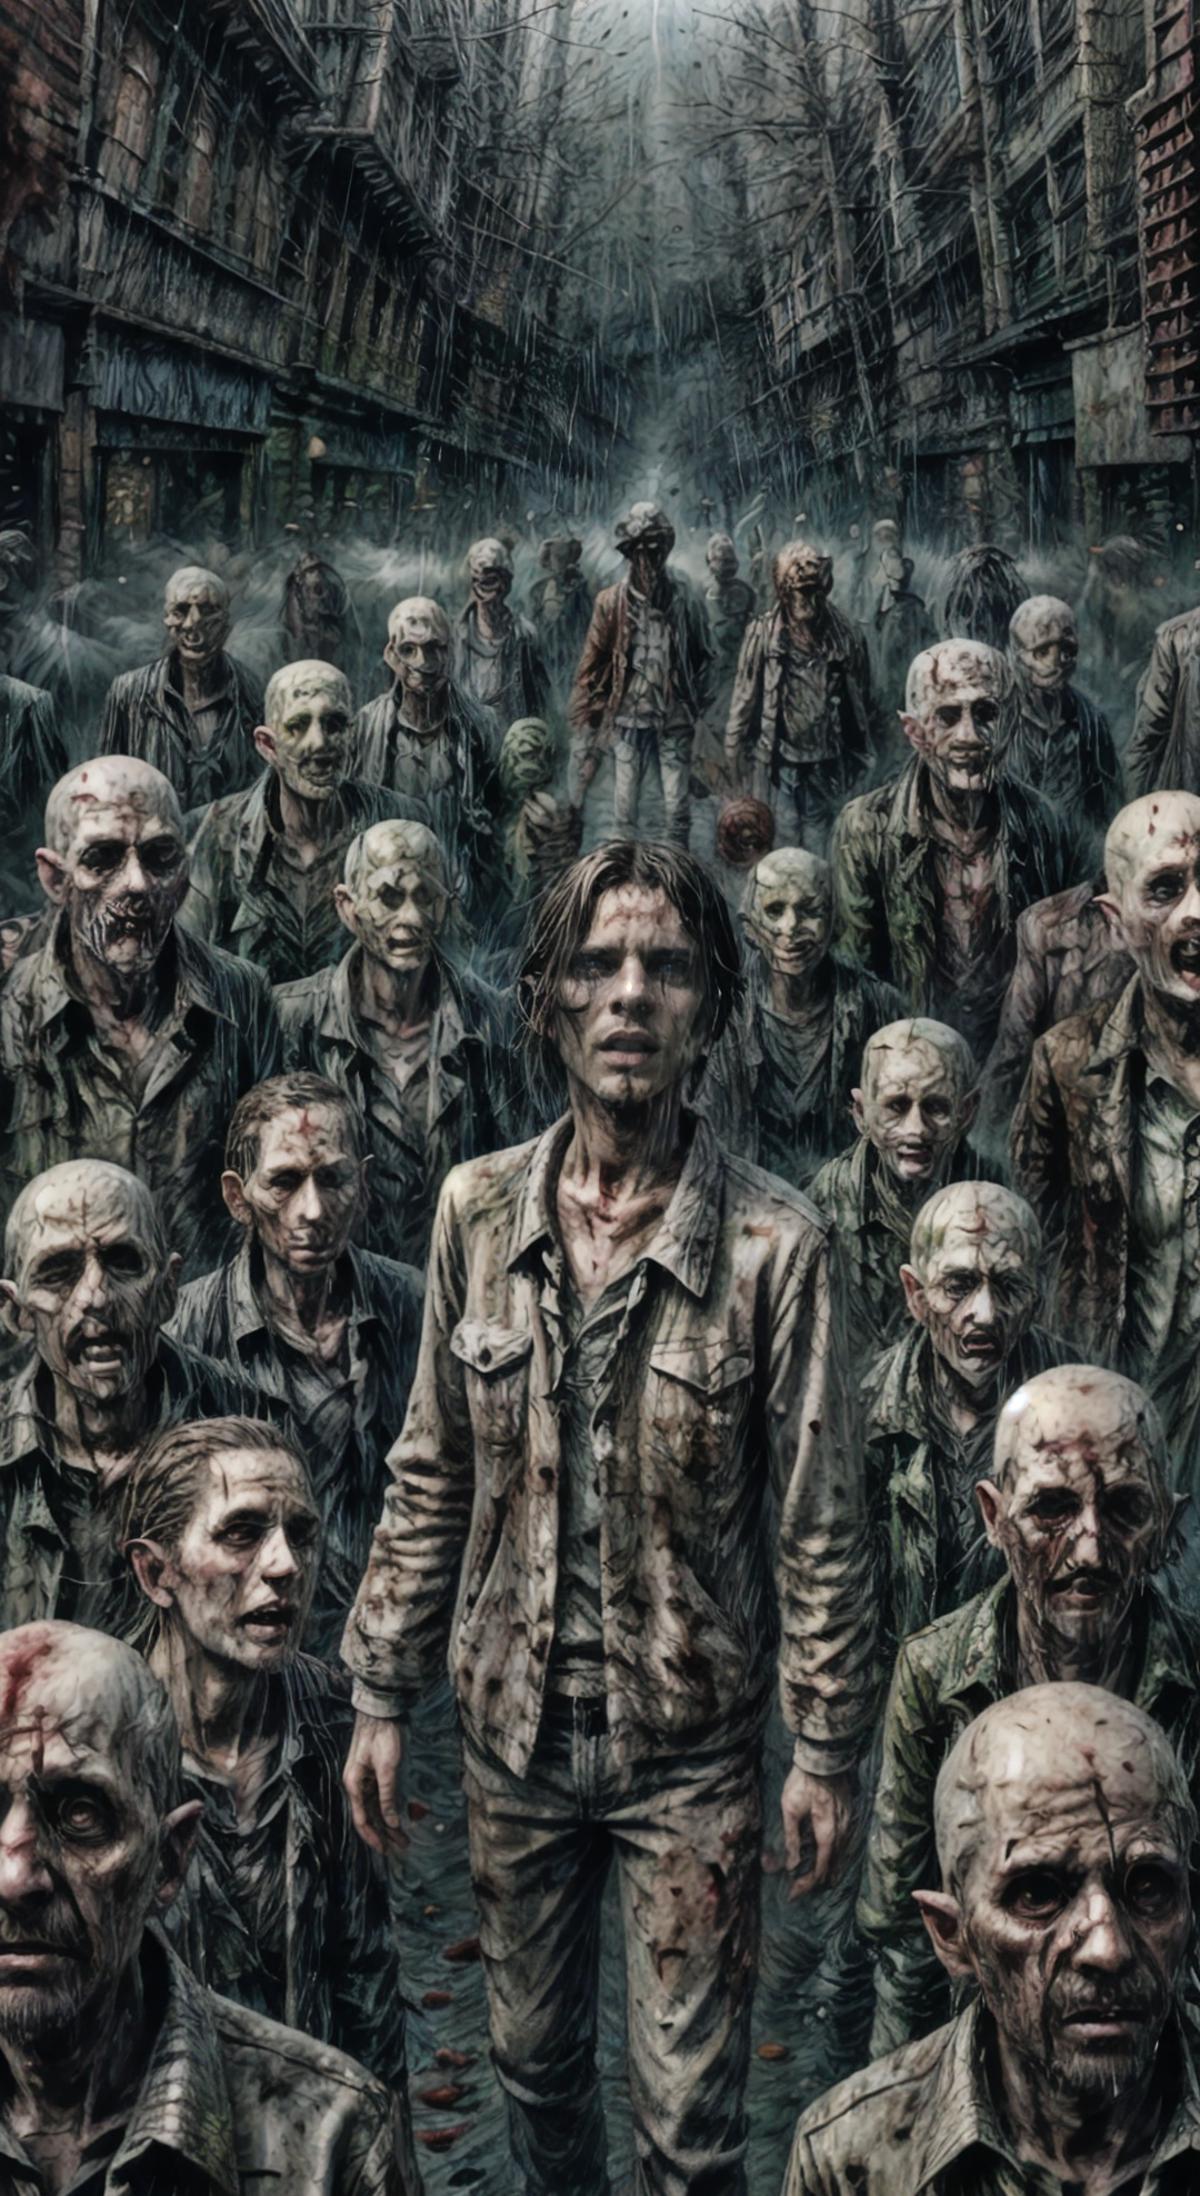 A large group of zombies with one person standing out among them.